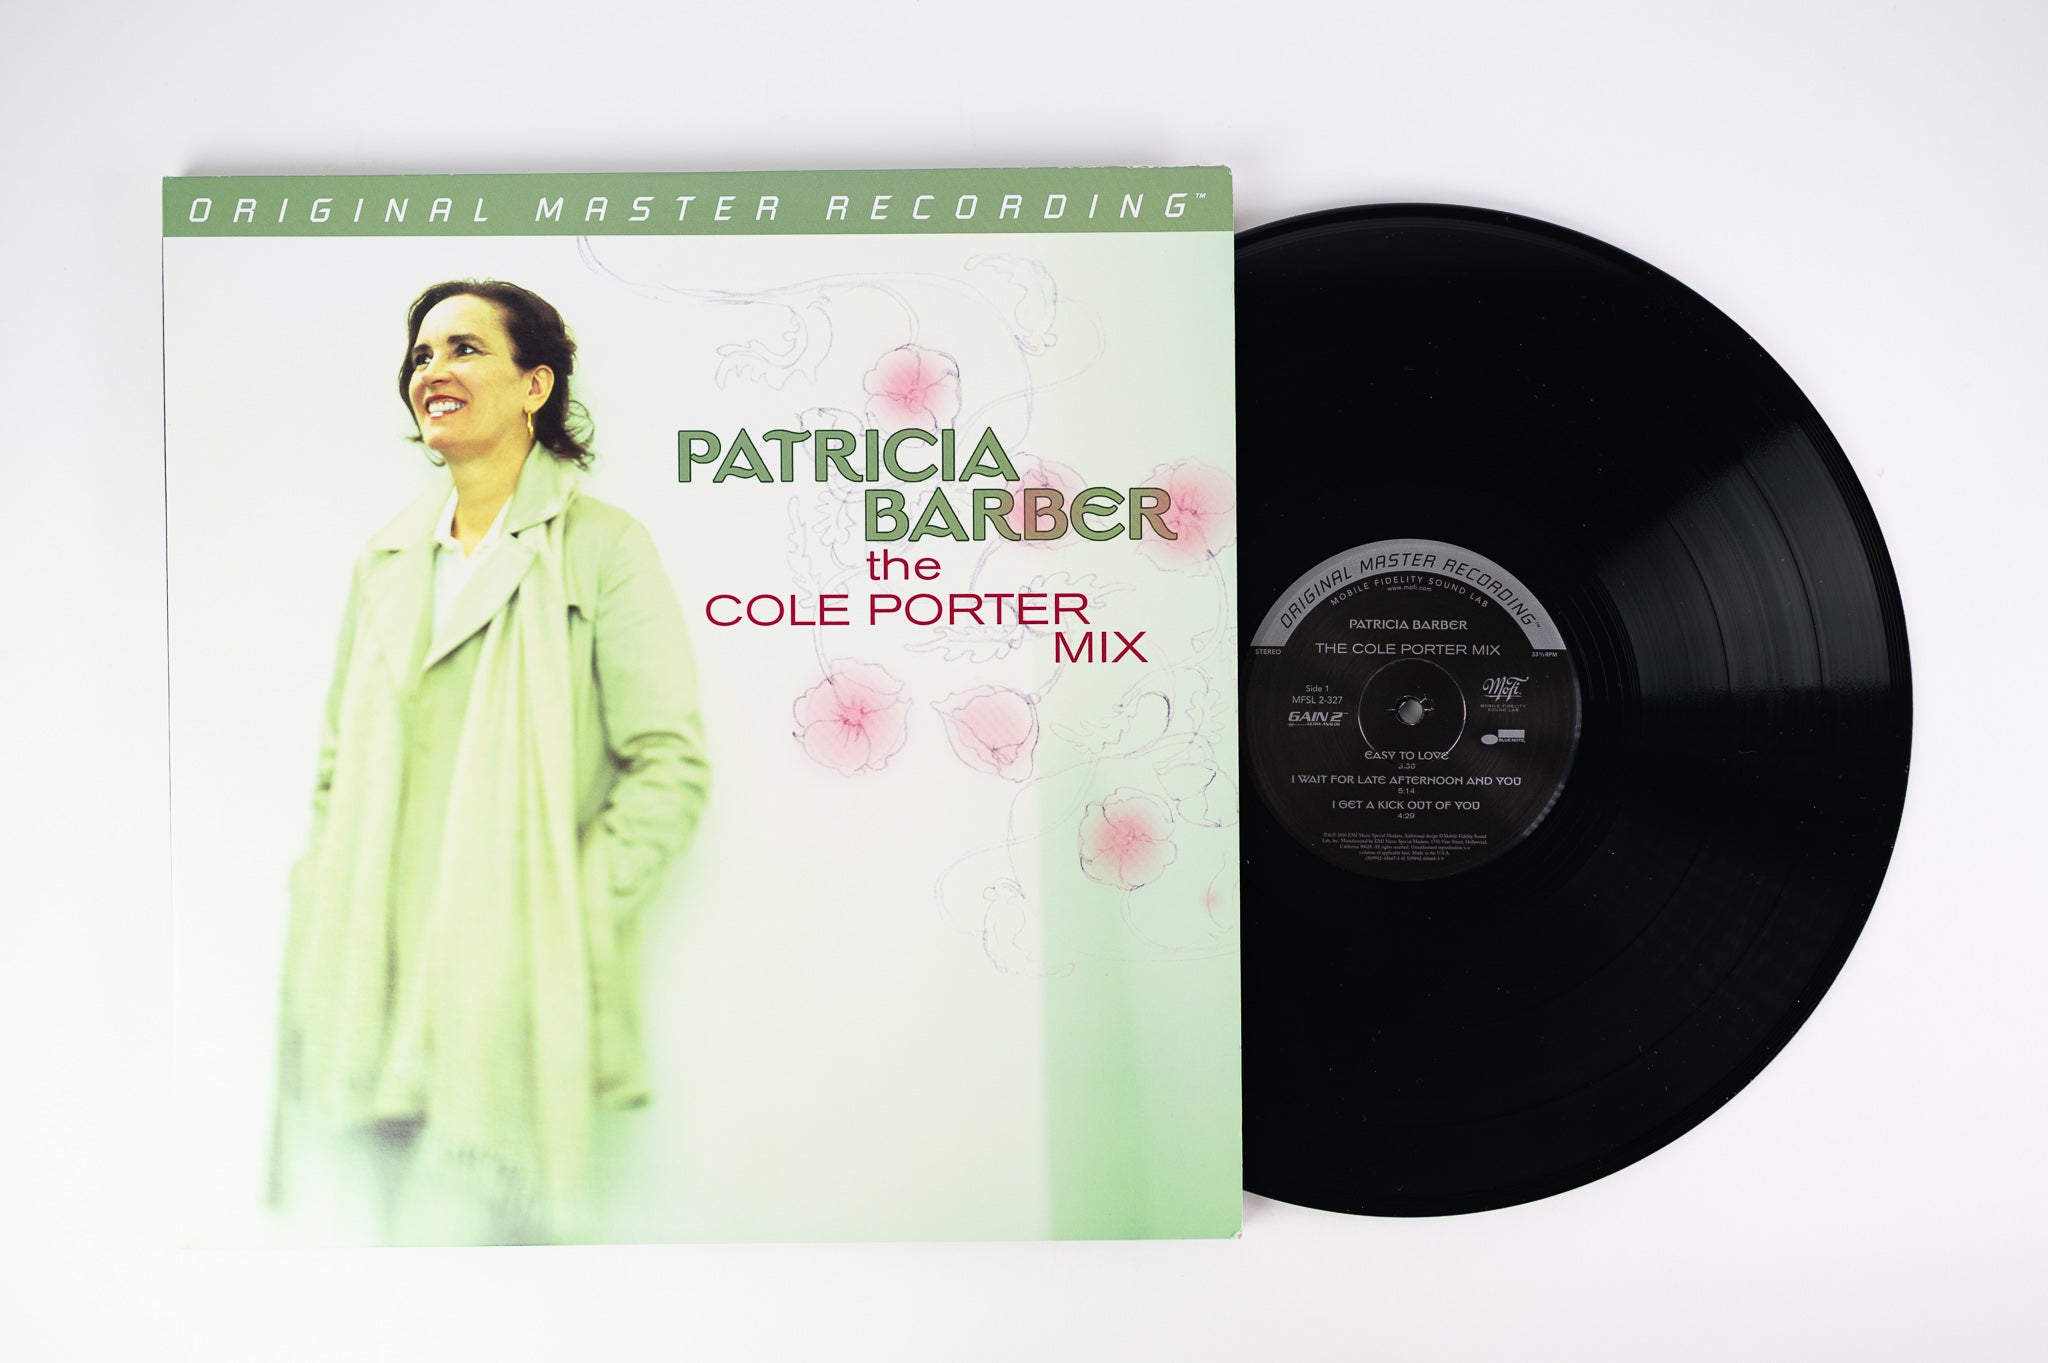 Patricia Barber - The Cole Porter Mix on Mobile Fidelity Sound Lab